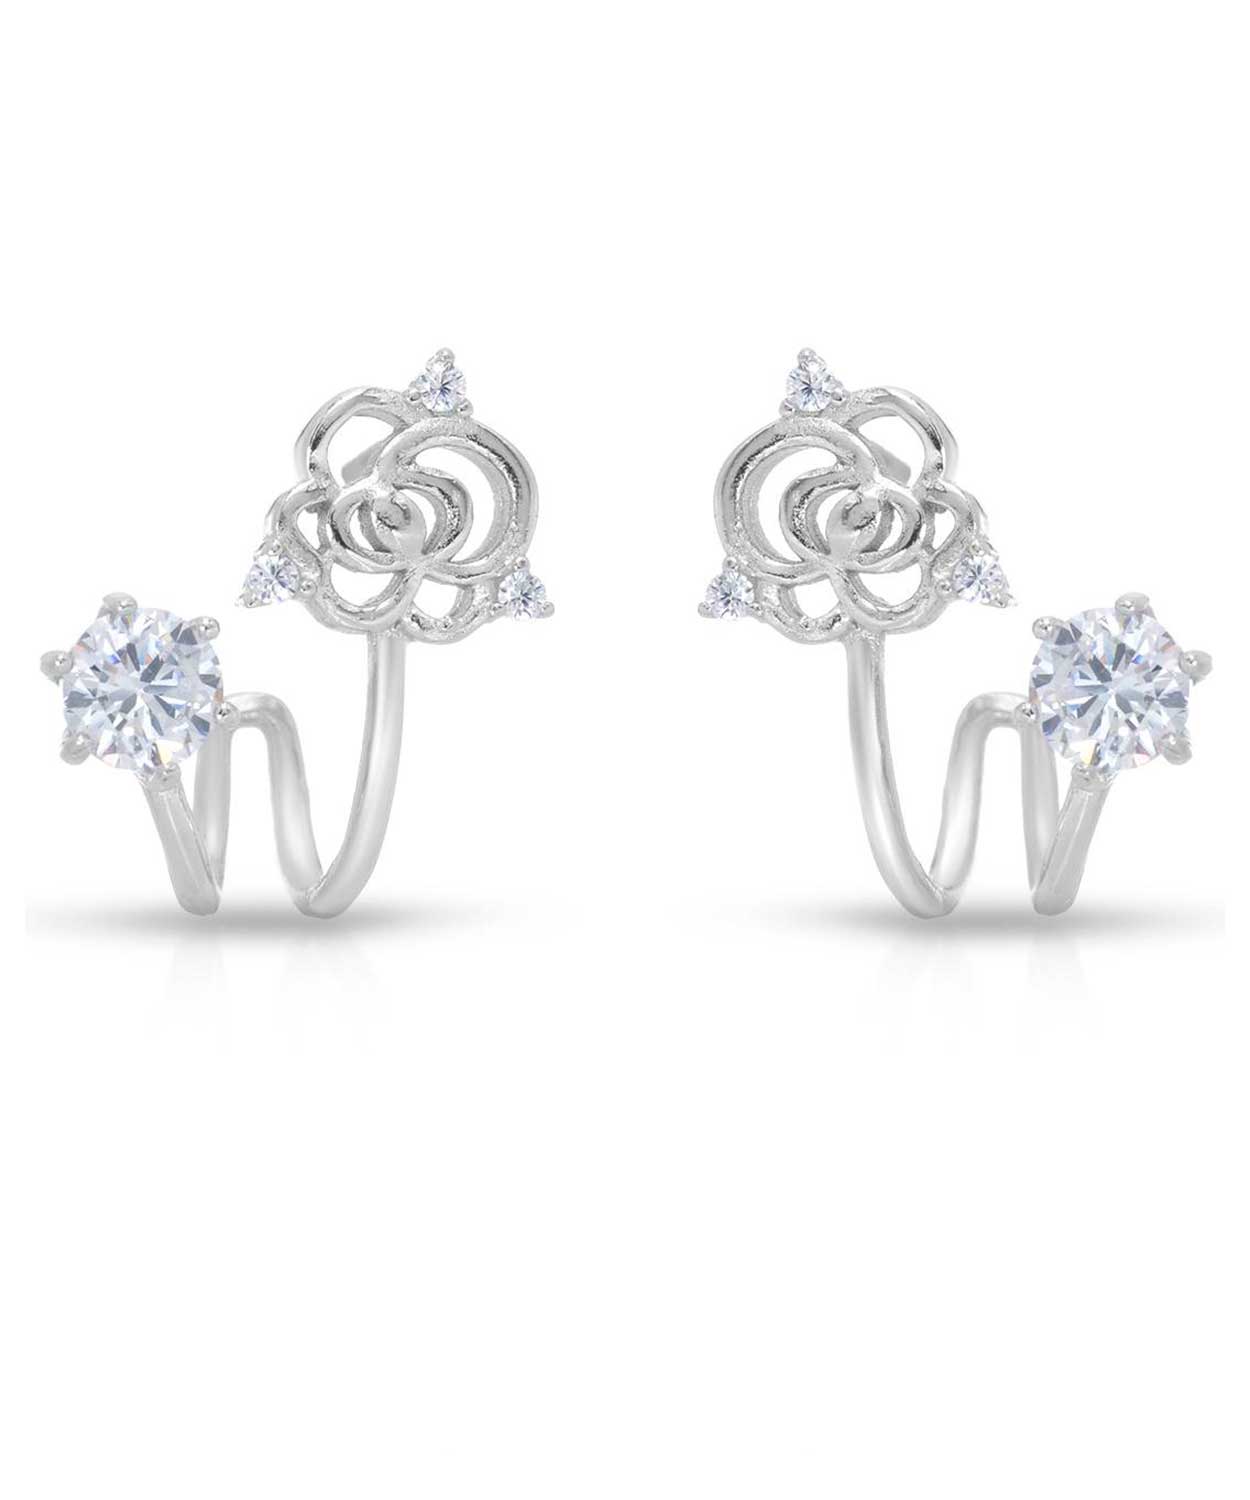 Brilliant Cut Cubic Zirconia Rhodium Plated 925 Sterling Silver Flower Earrings View 1